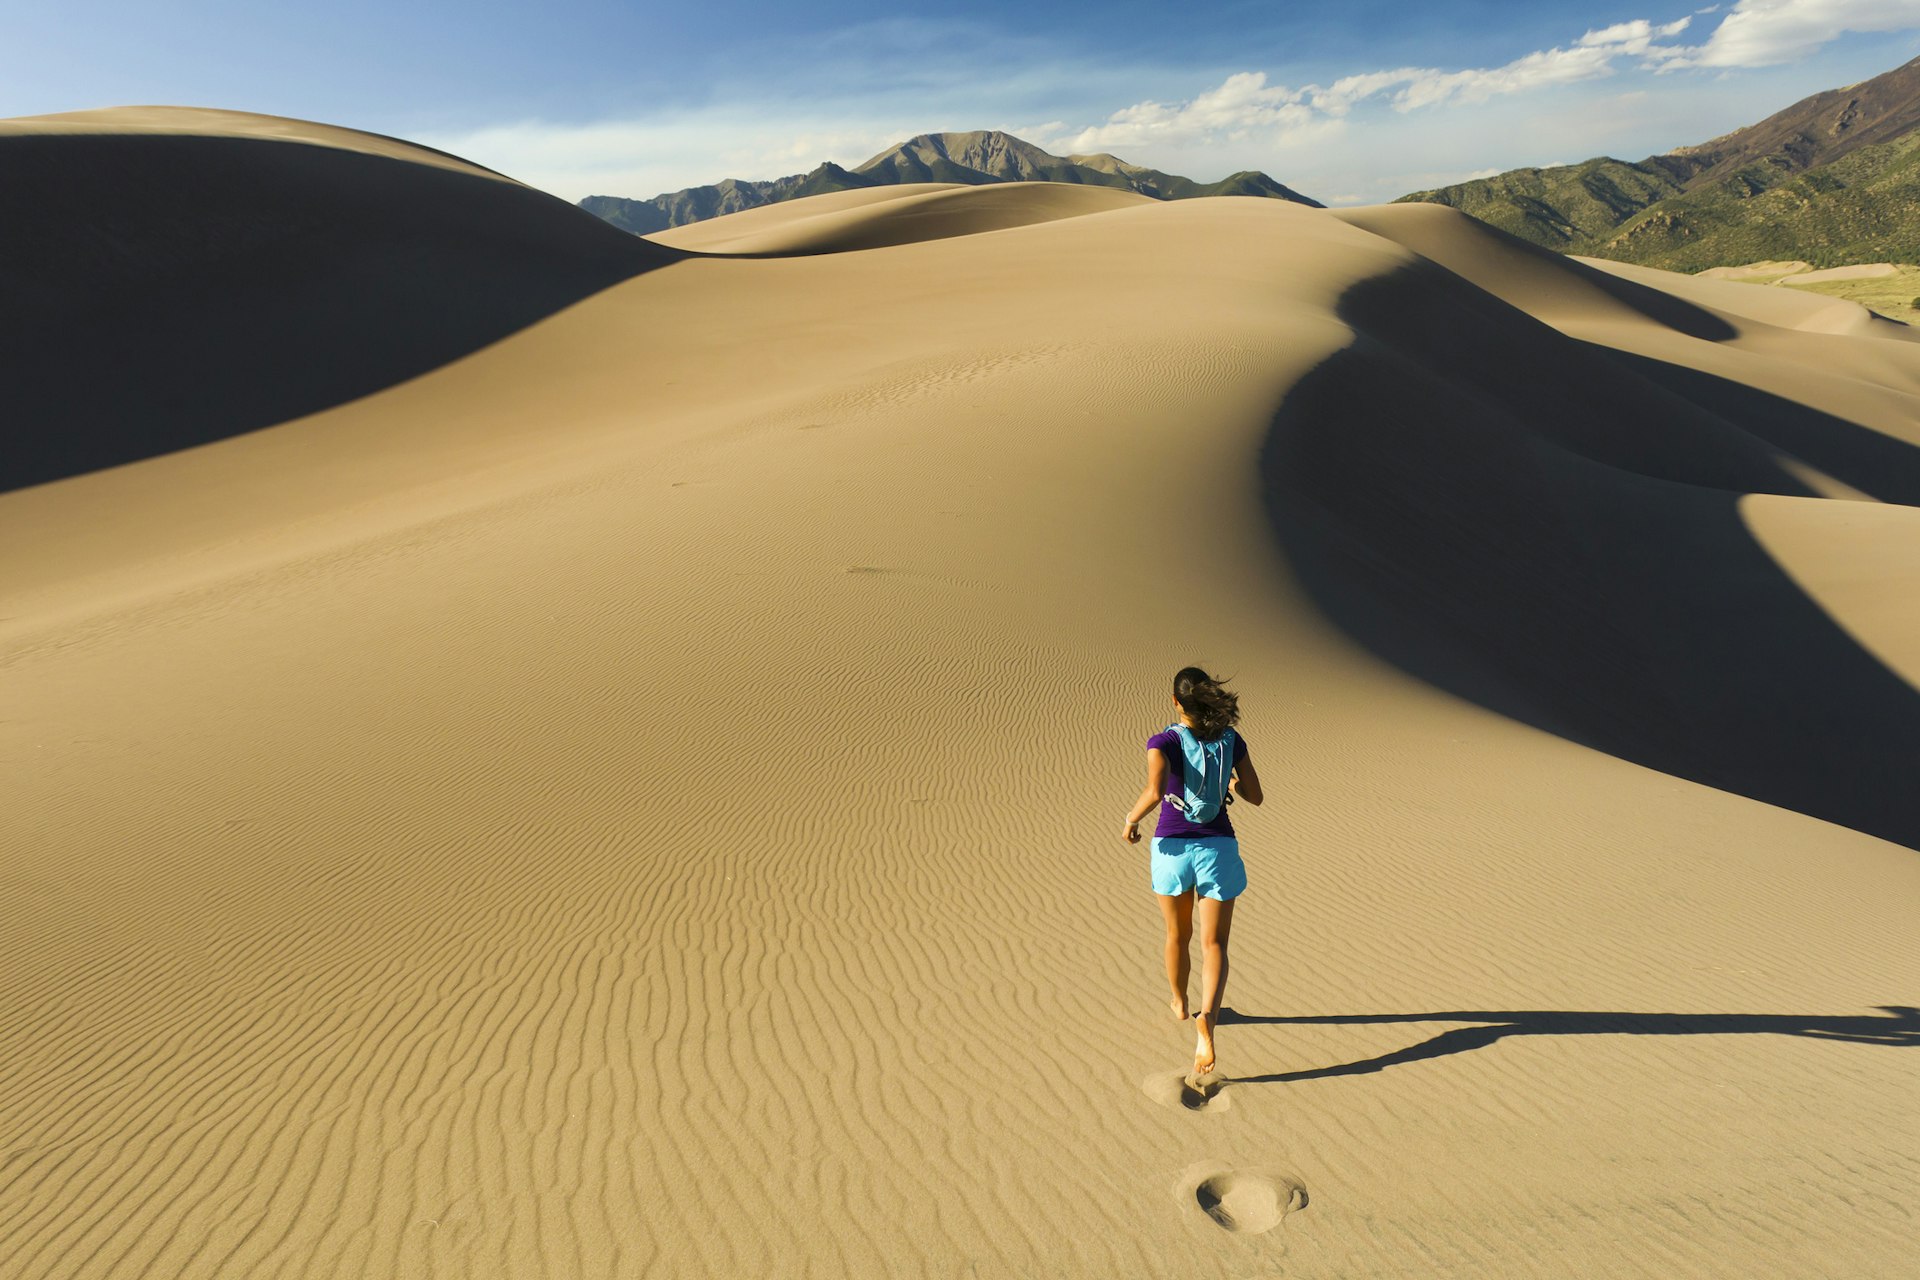 Woman running on sand dune in Great Sand Dunes National Park, Colorado